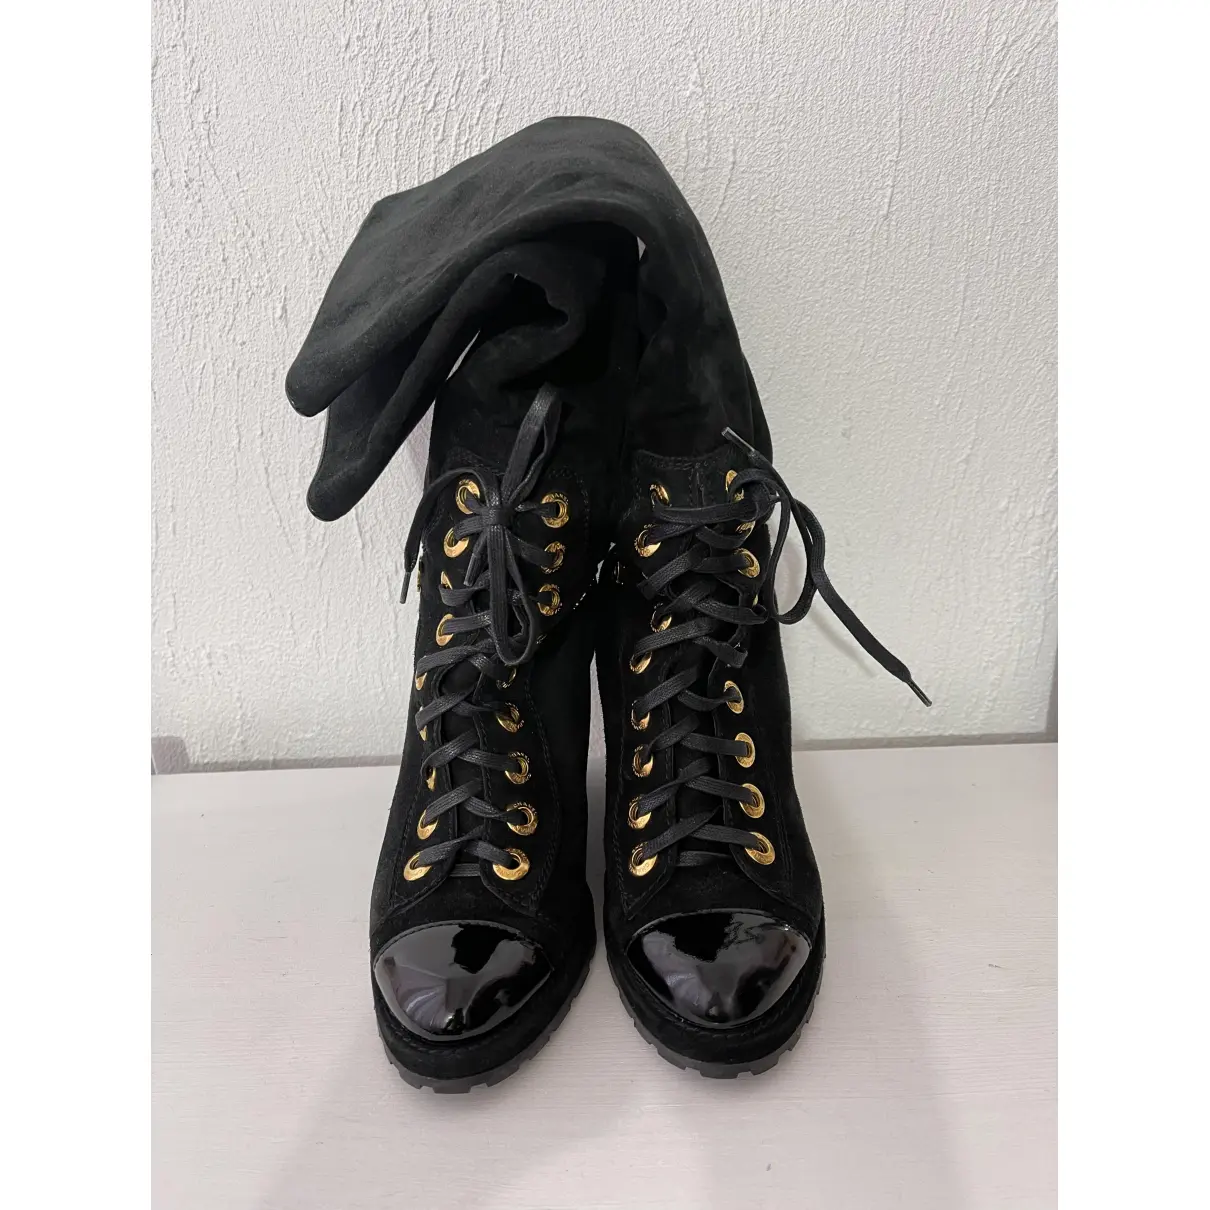 Buy Chanel Boots online